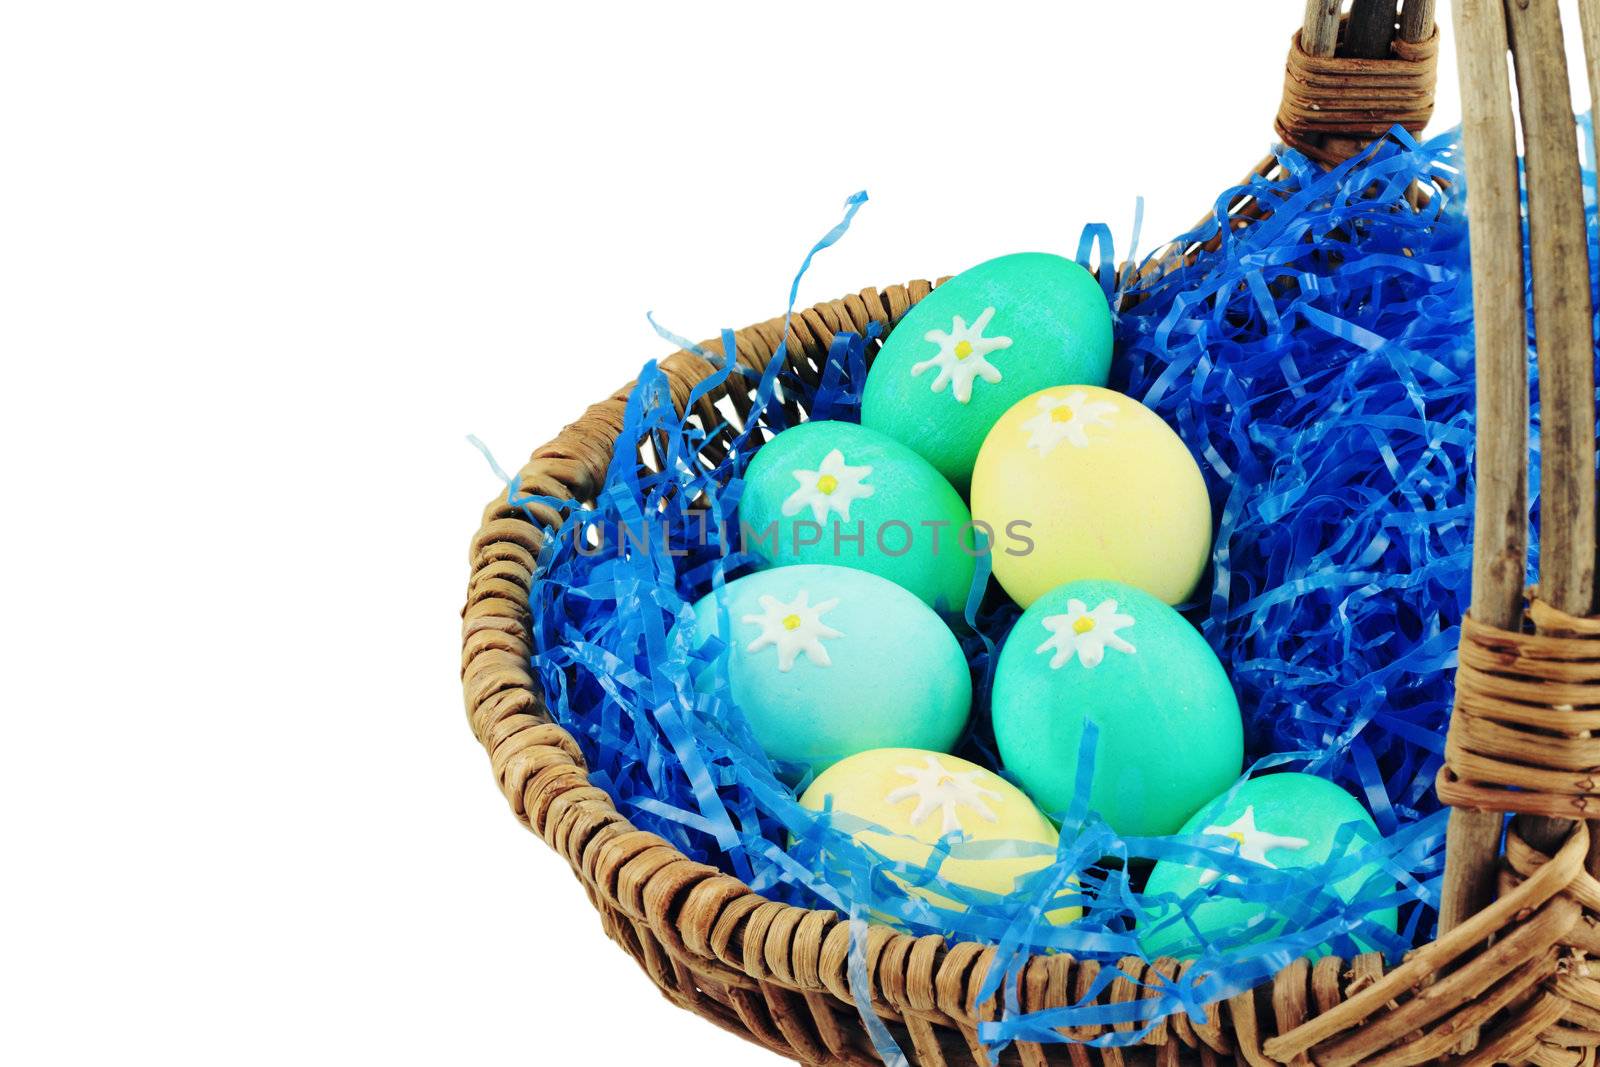 Basket with decorated Easter eggs isolated against a white background with room for copyspace. Shallow DOF.
